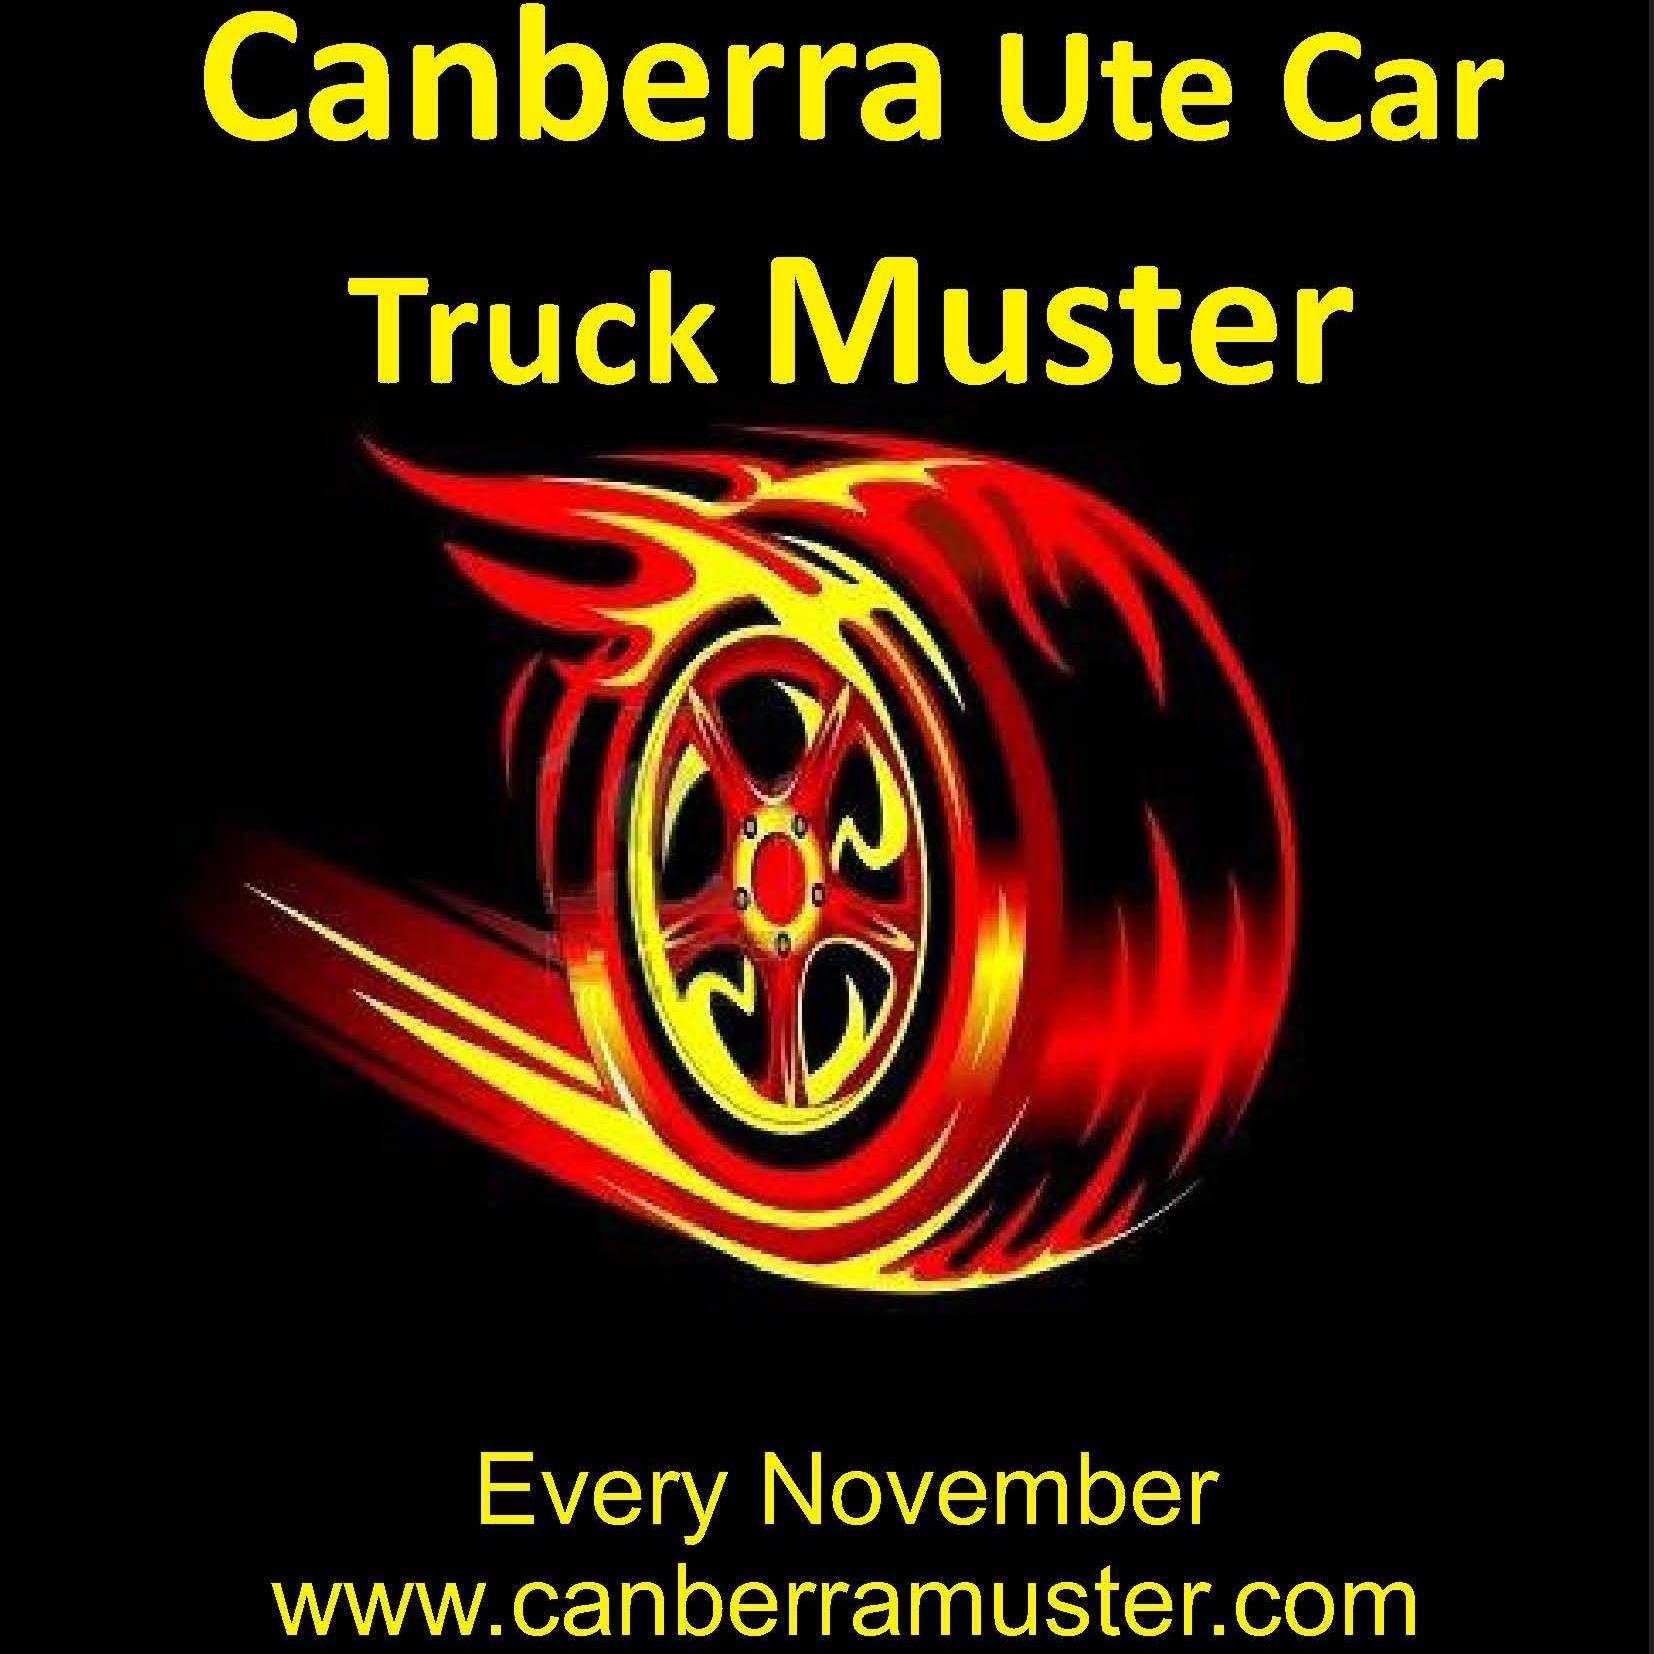 Canberra Ute Car & Truck Muster is held every Nov @ Queanbeyan Showground Glebe St as a show & shine event displaying great vehicles & assisting charities.